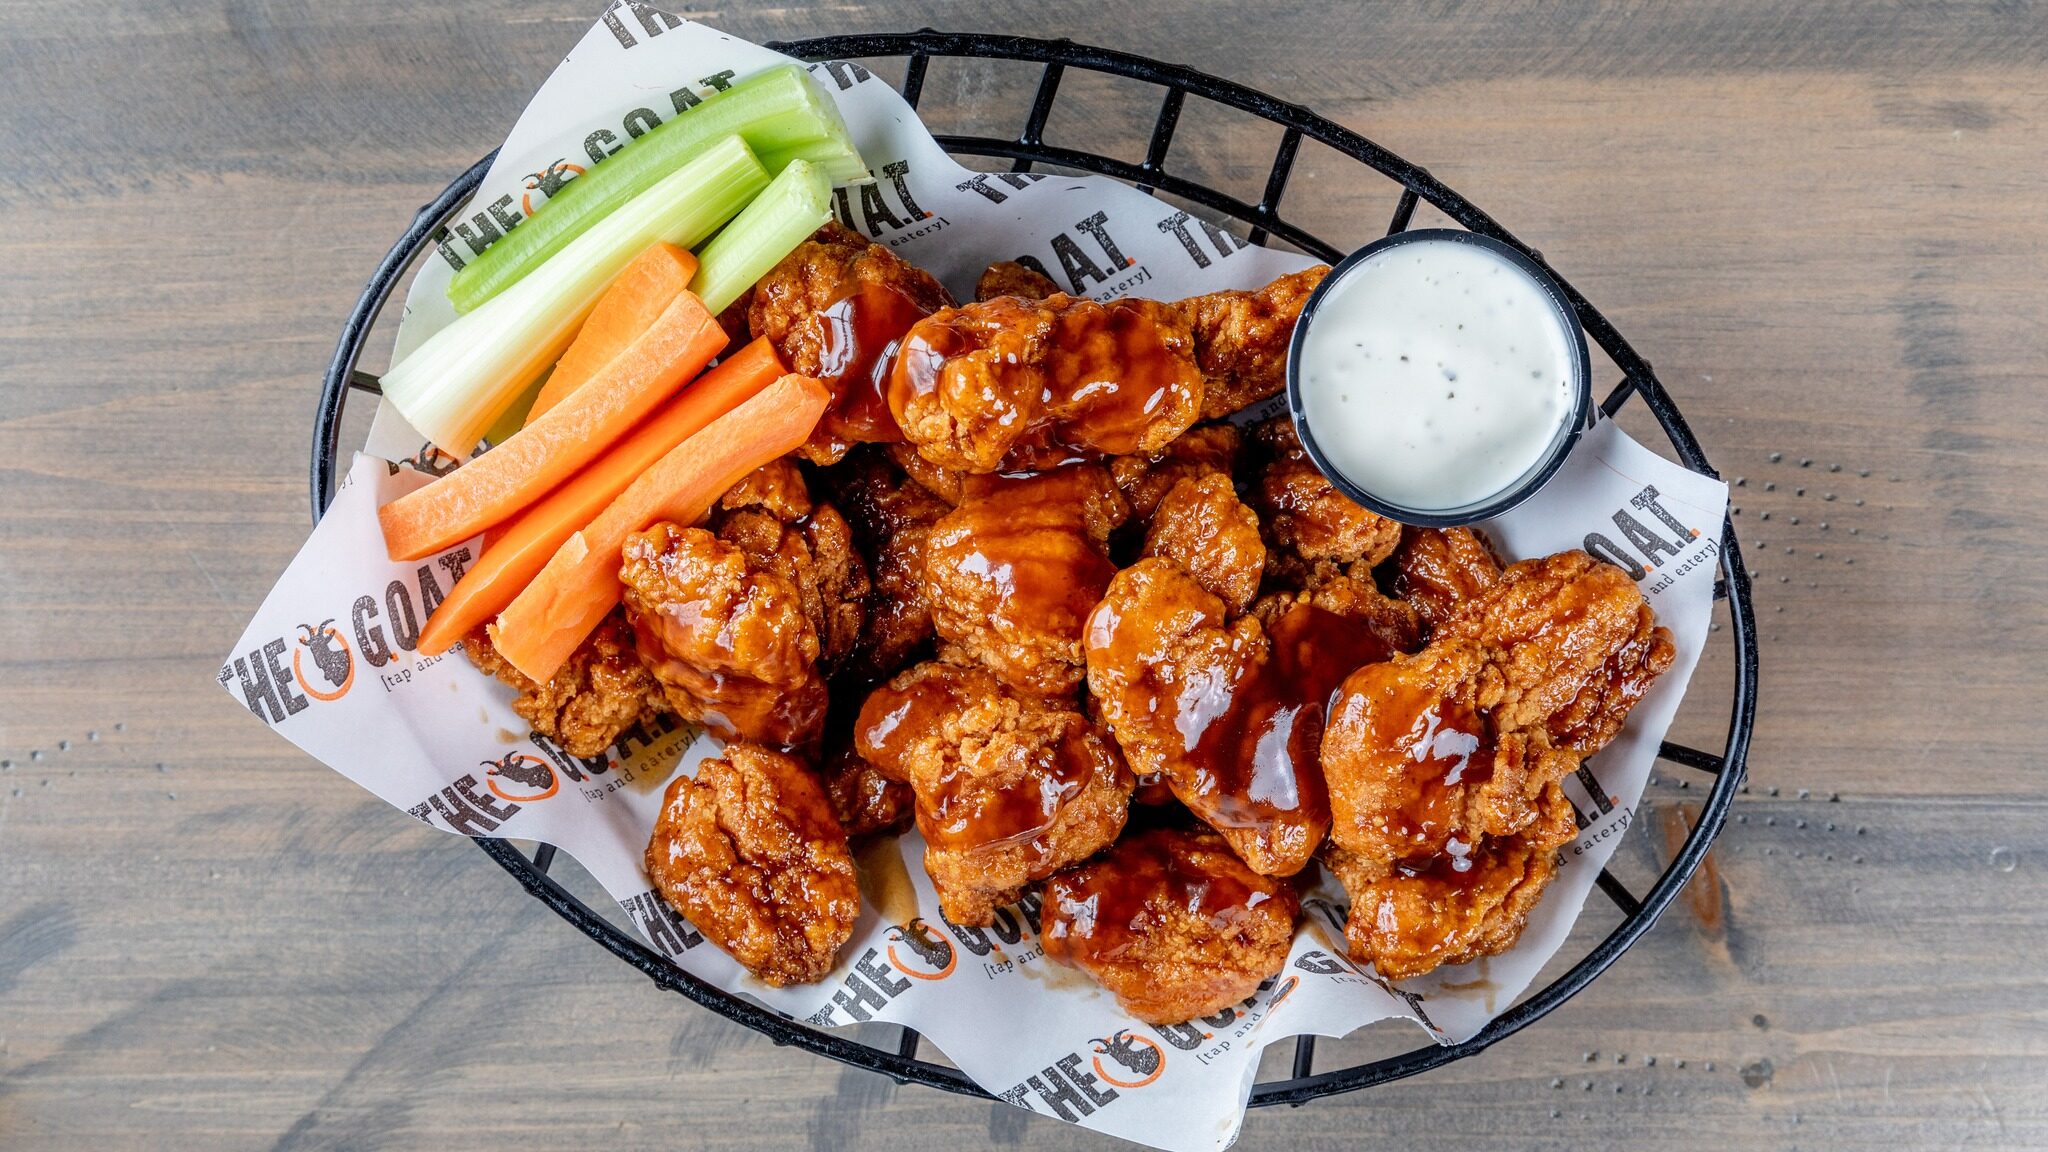 Wings from The G.O.A.T. Tap & Eatery.